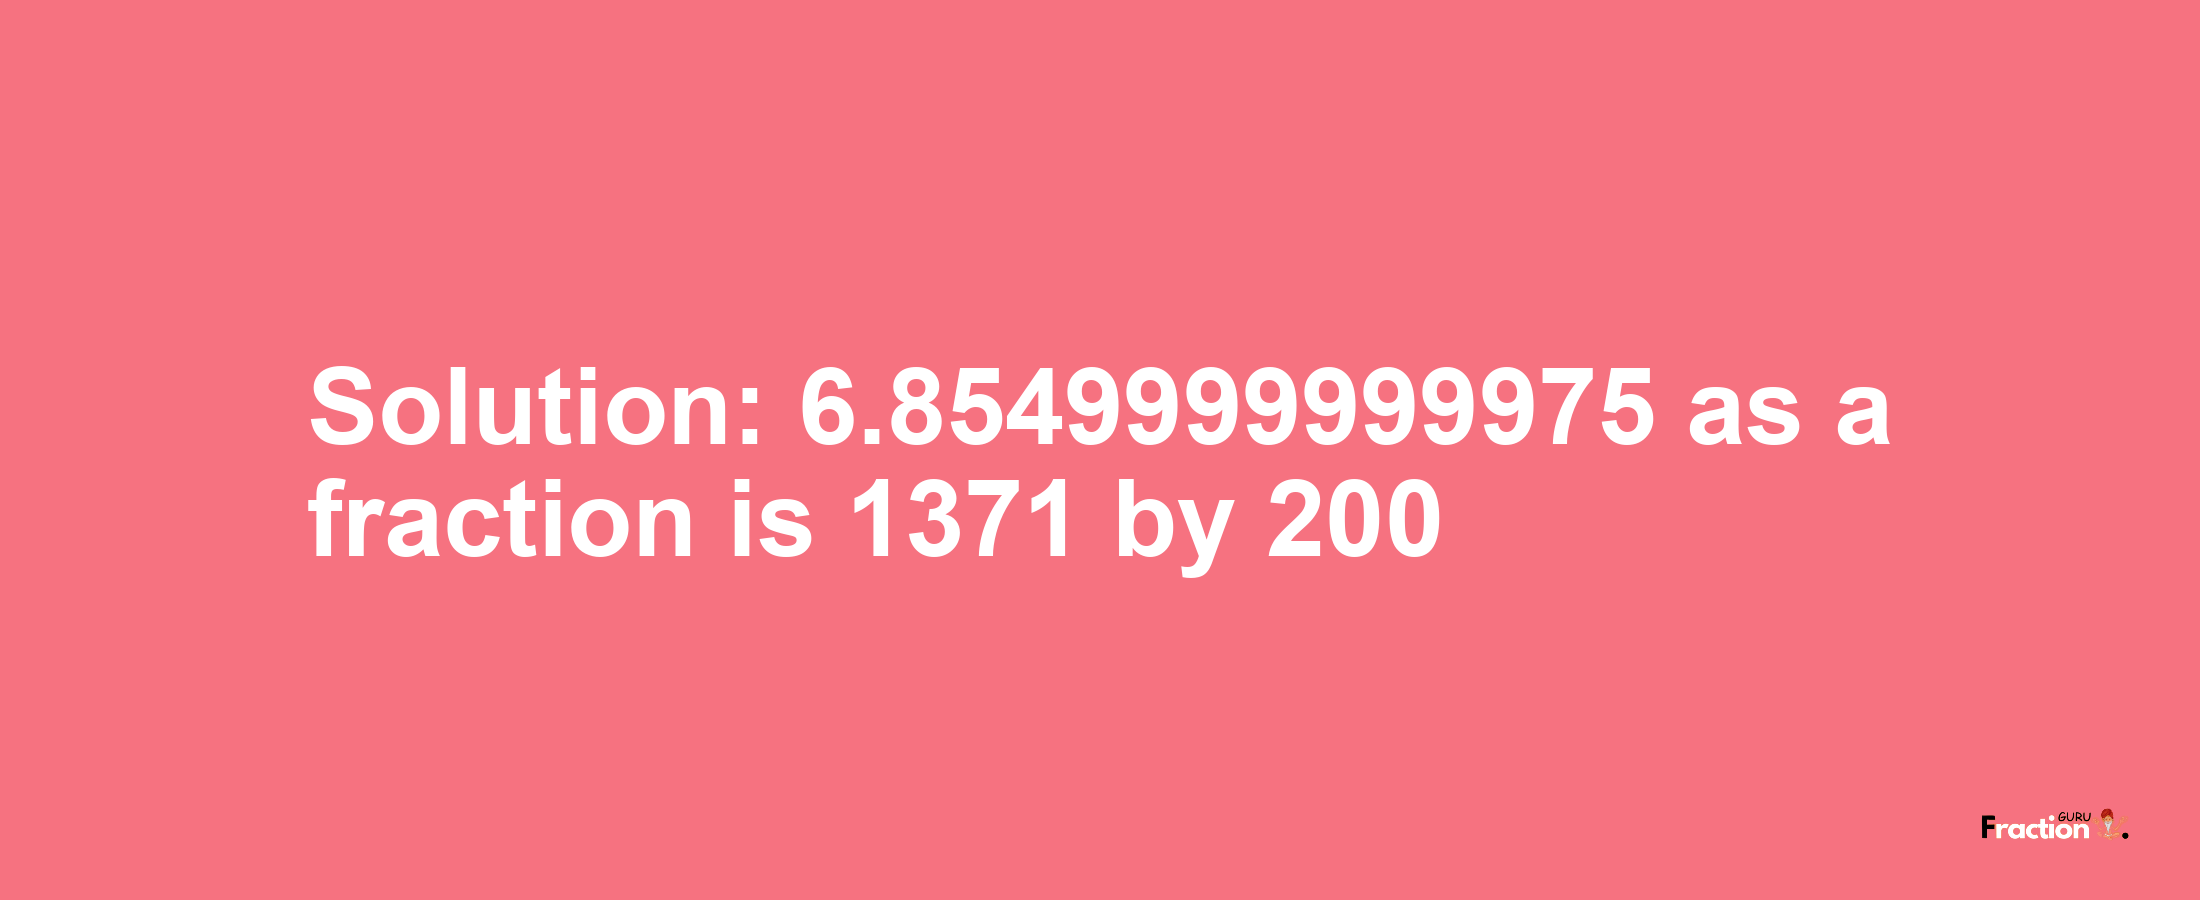 Solution:6.8549999999975 as a fraction is 1371/200